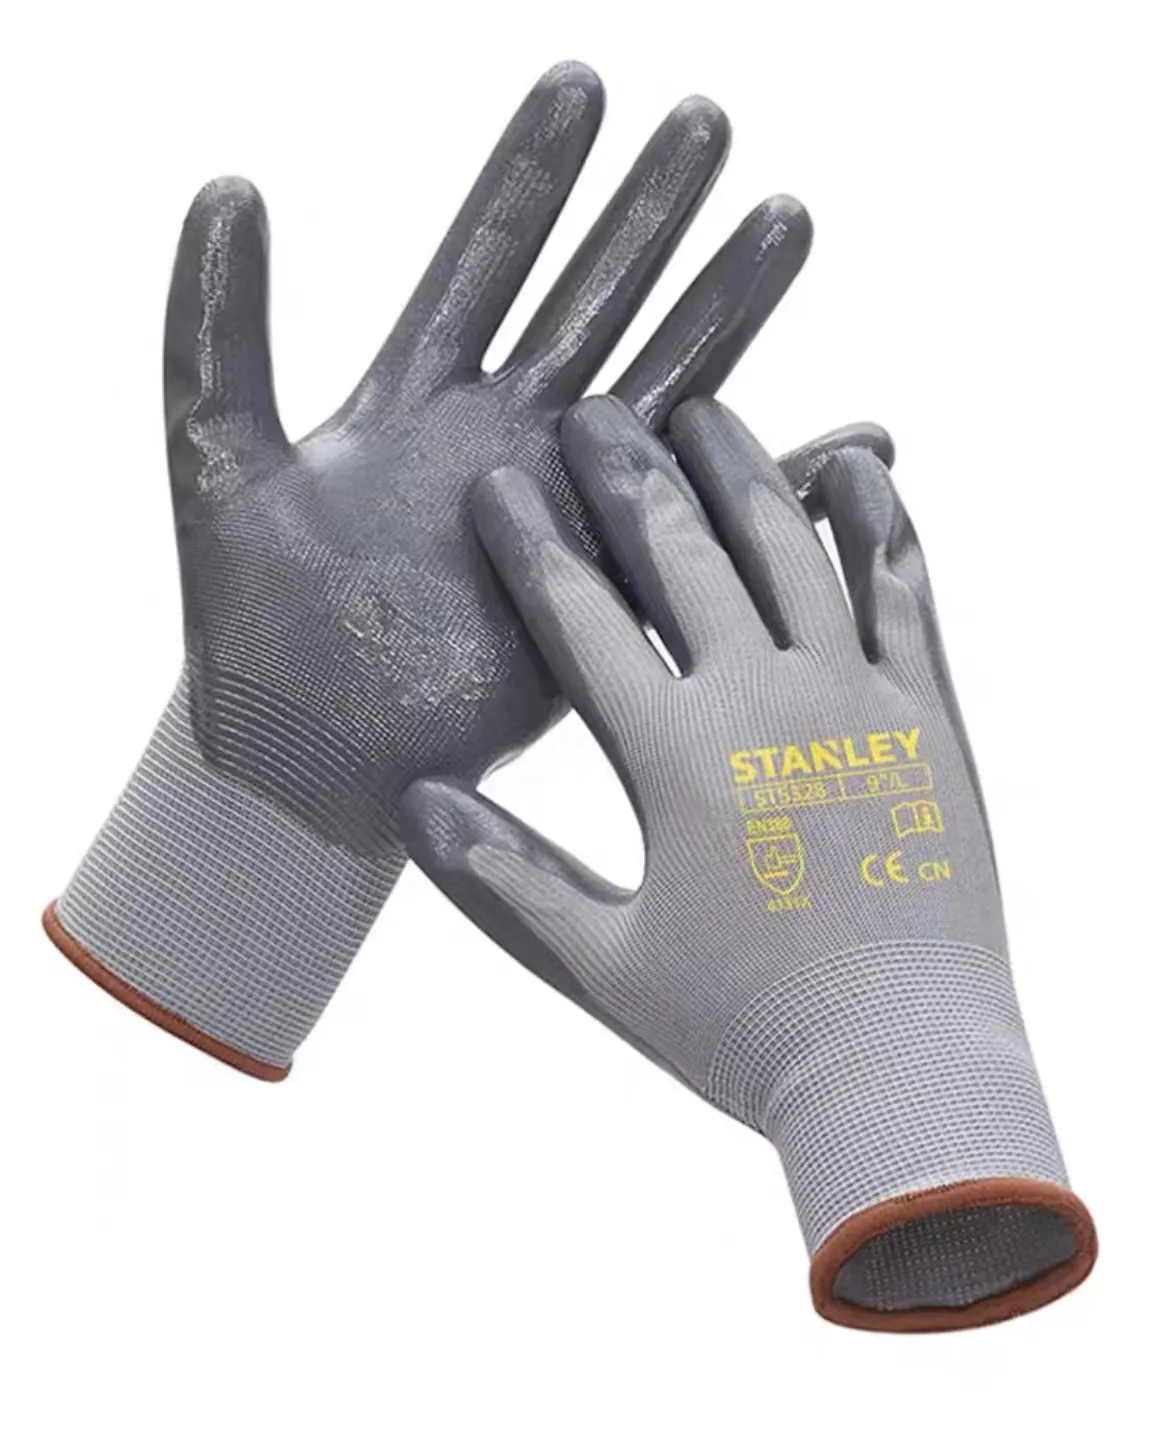 Working Personal Protective Gloves for Construction